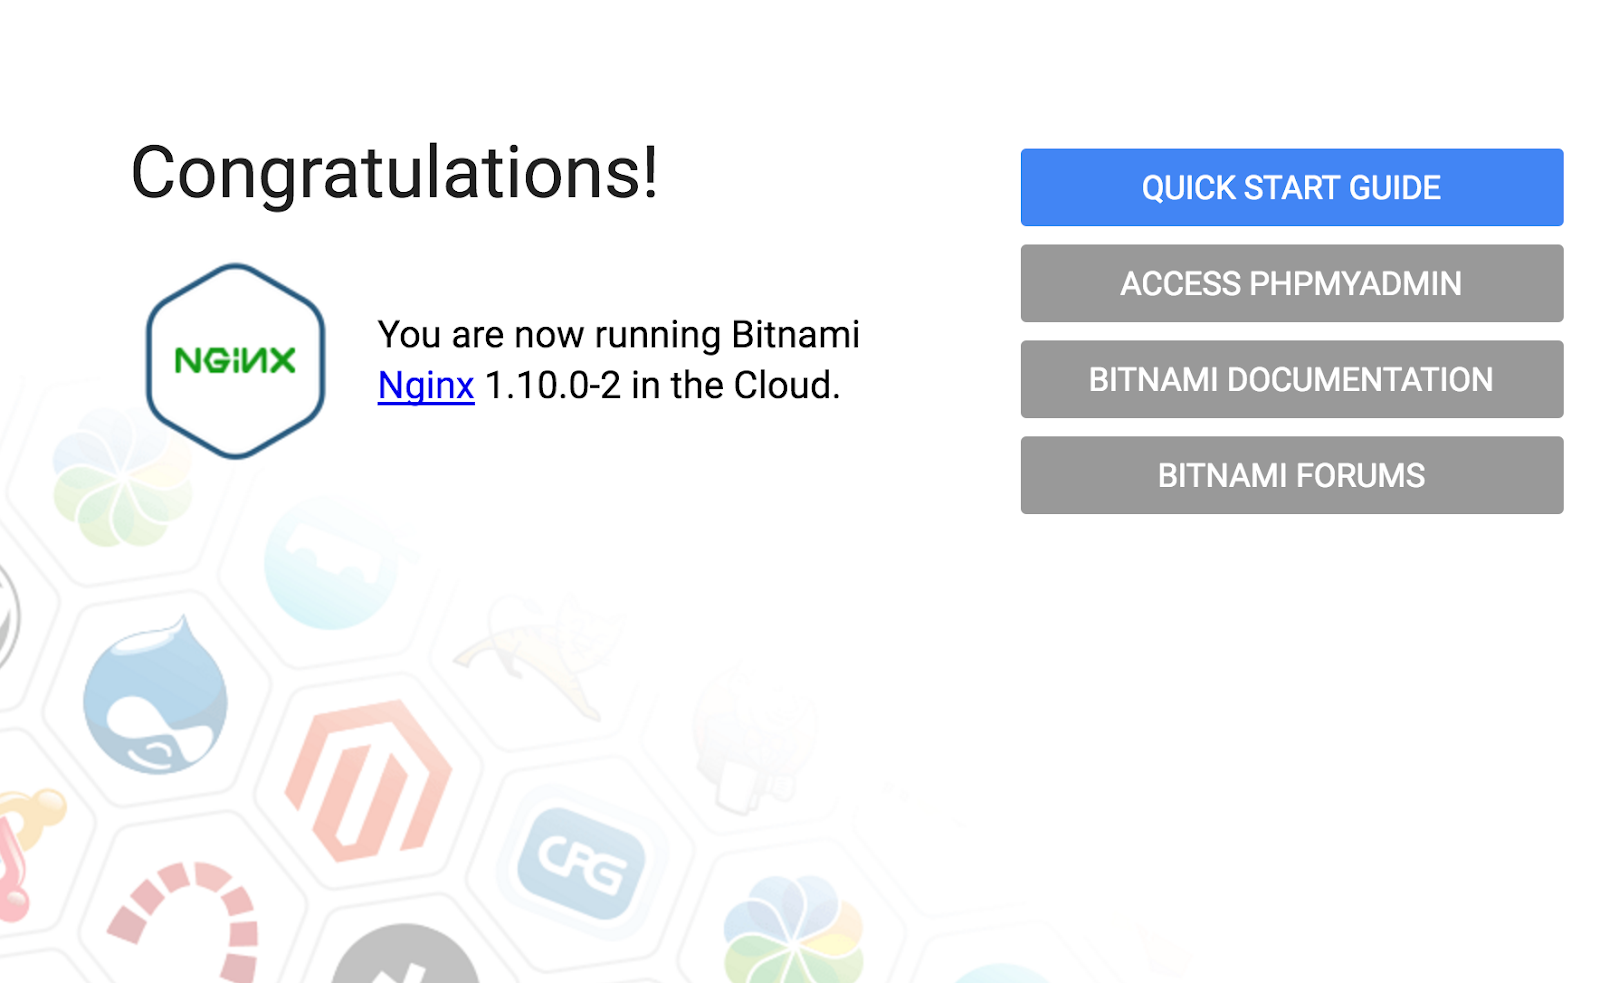 The Congratulations! pop-up, with the 'You are now running Bitnami Nginx 1.10.0-2 in the Cloud notification.